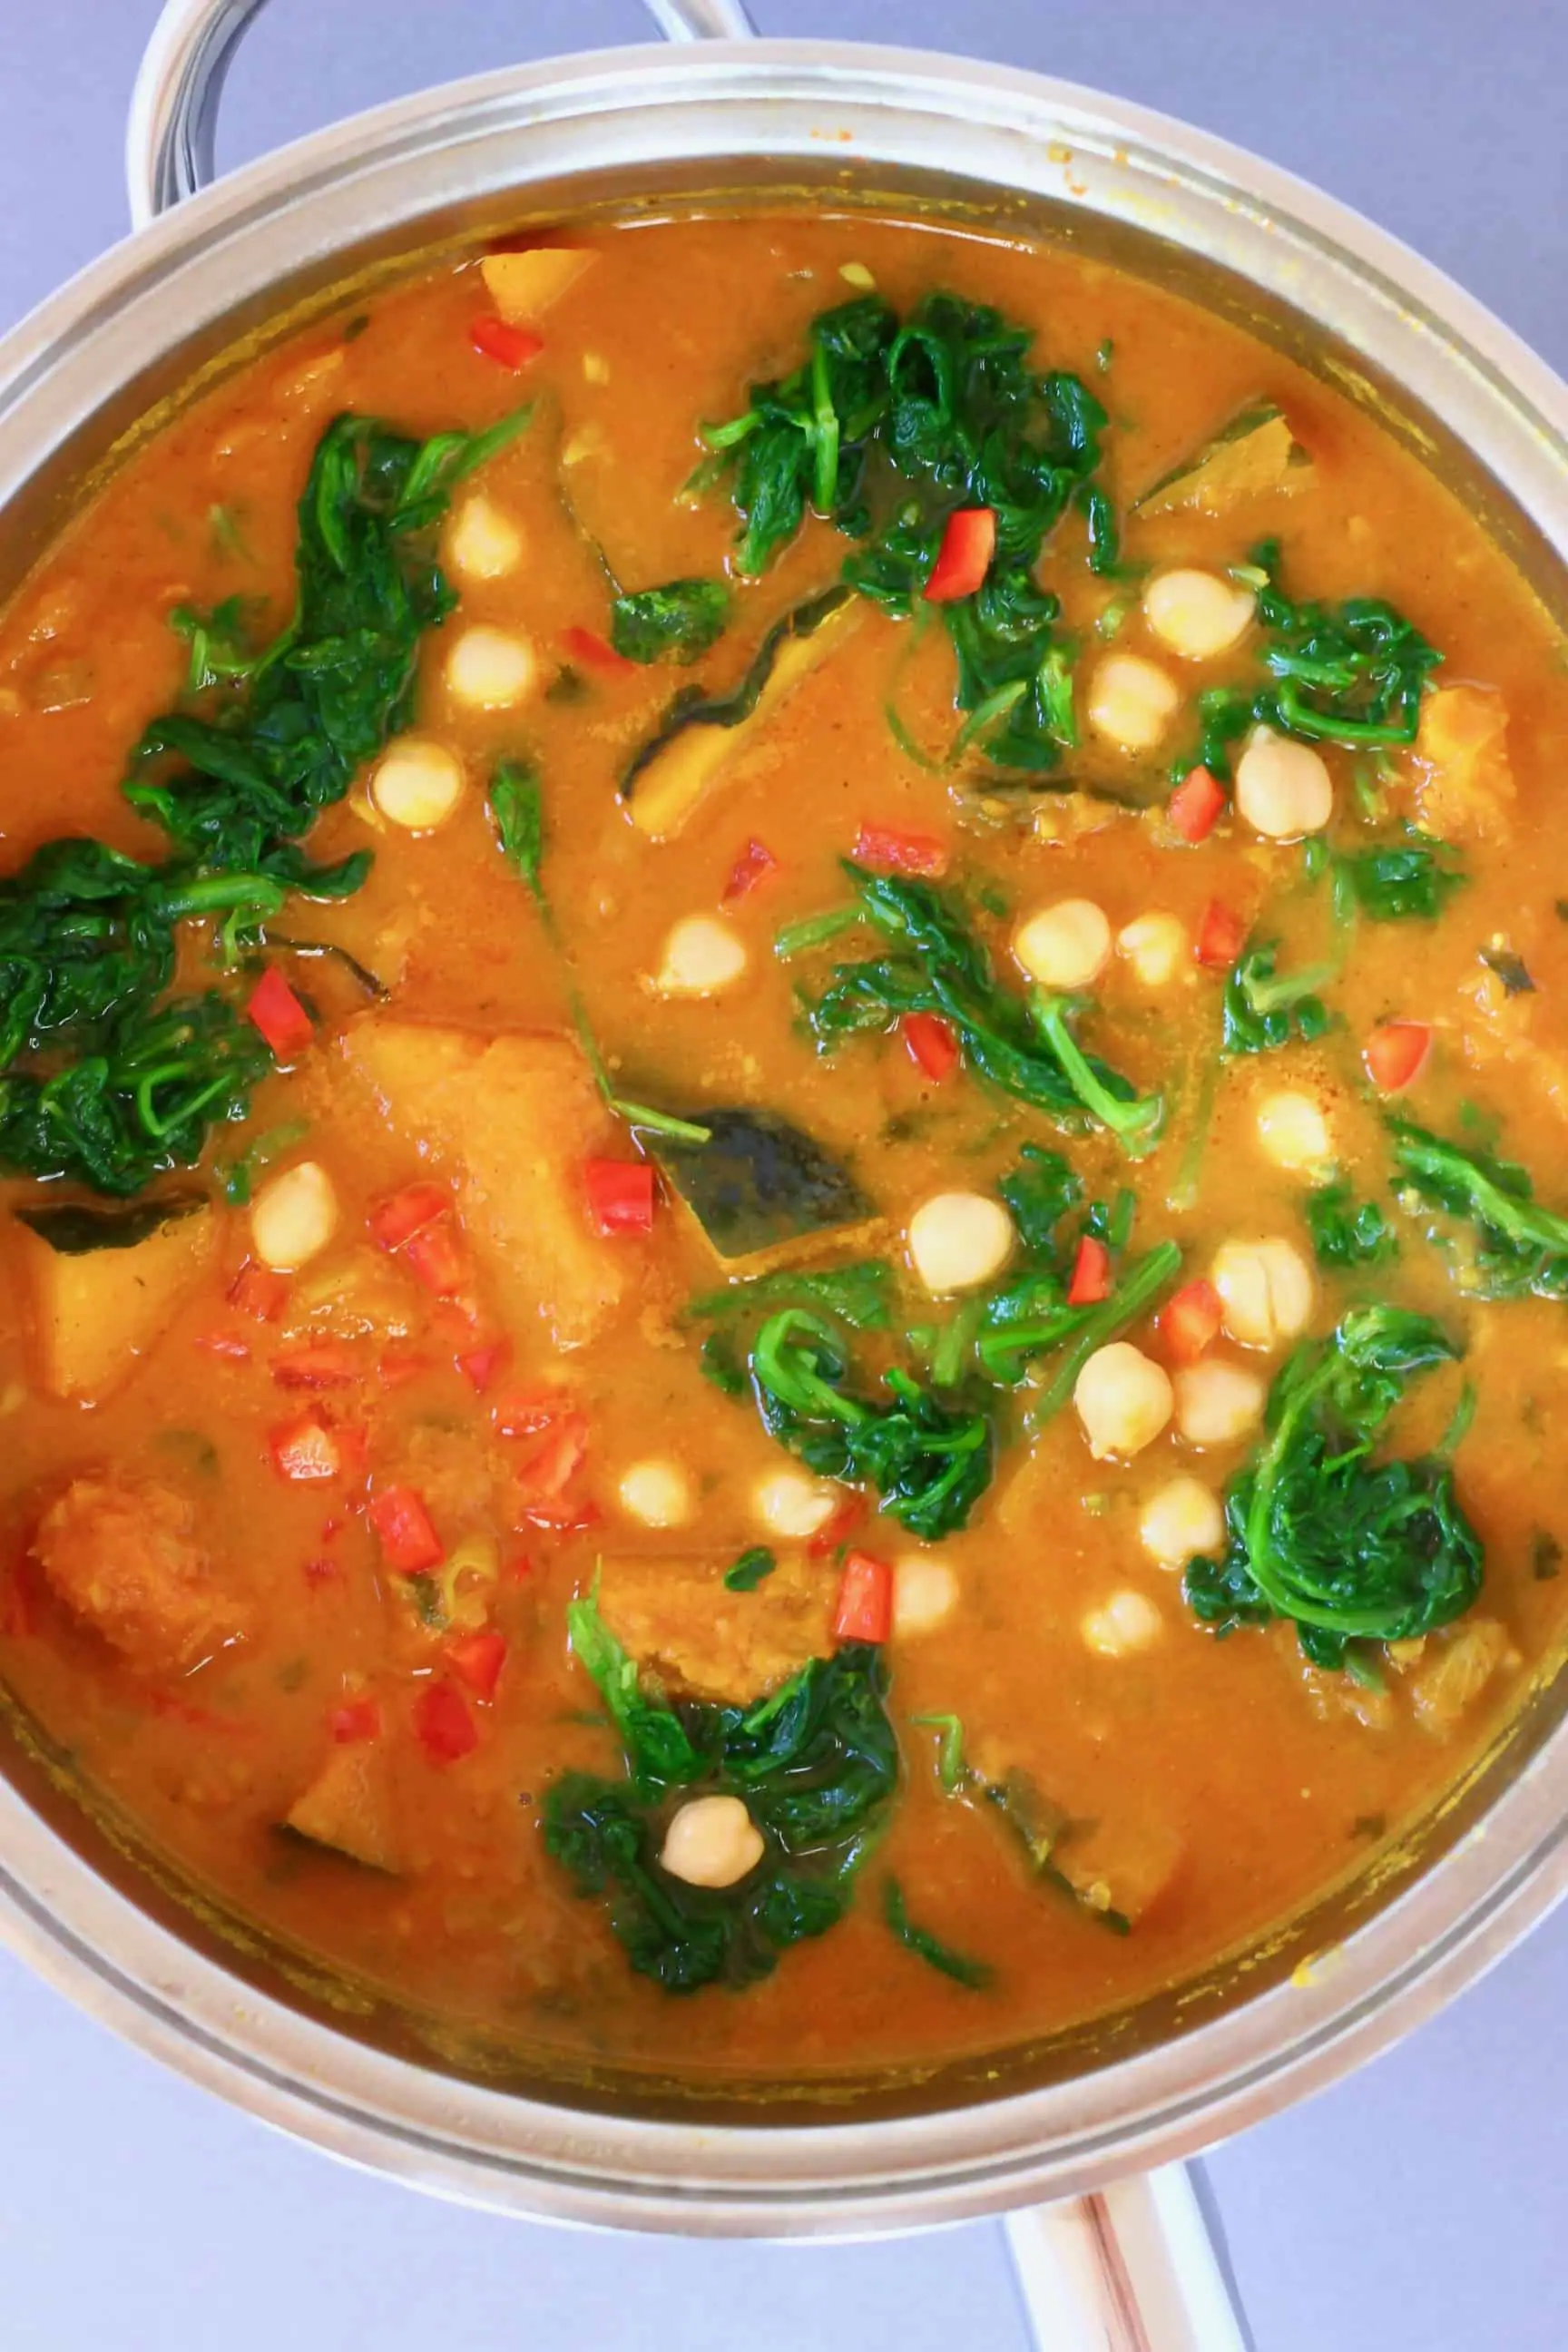 Diced pumpkin, chickpeas and spinach in an orange curry sauce in a silver saucepan